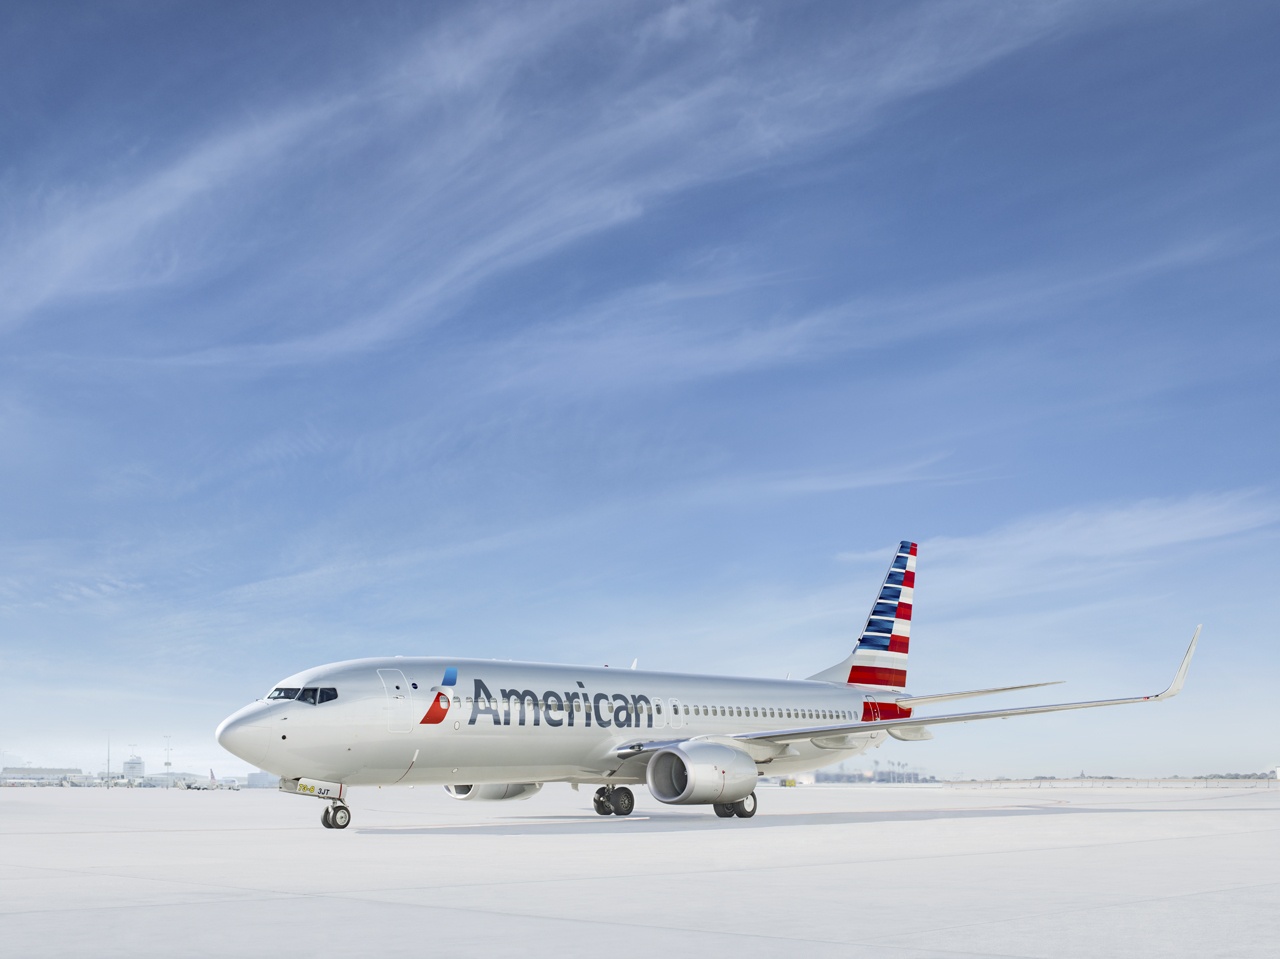 American Airlines extends grounding period until 2 Nov